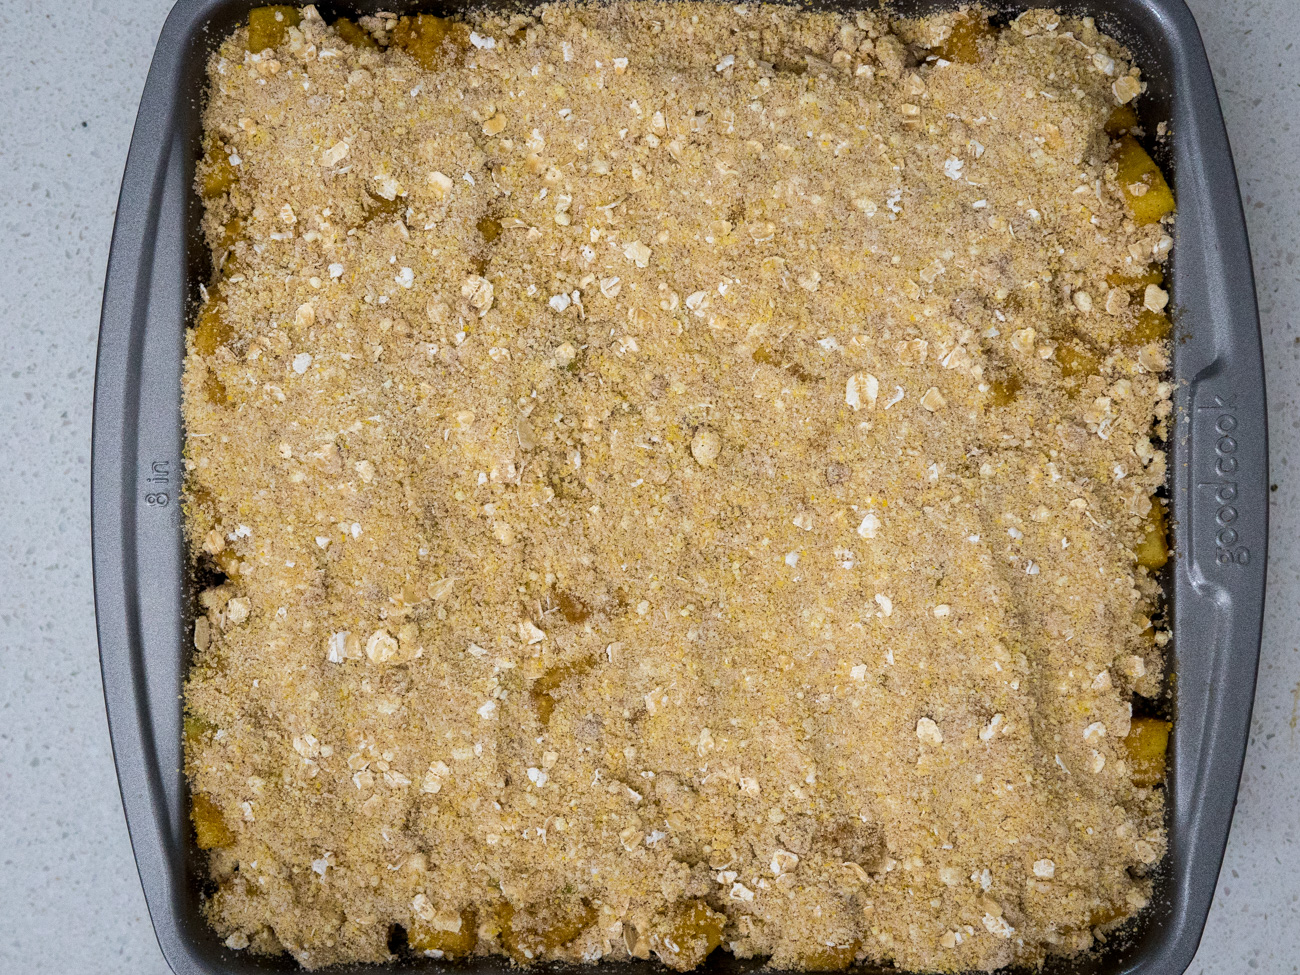 Top apples with remaining cornbread crumble. Bake for 30-35 minutes. Best served warm with a scoop of vanilla ice cream.